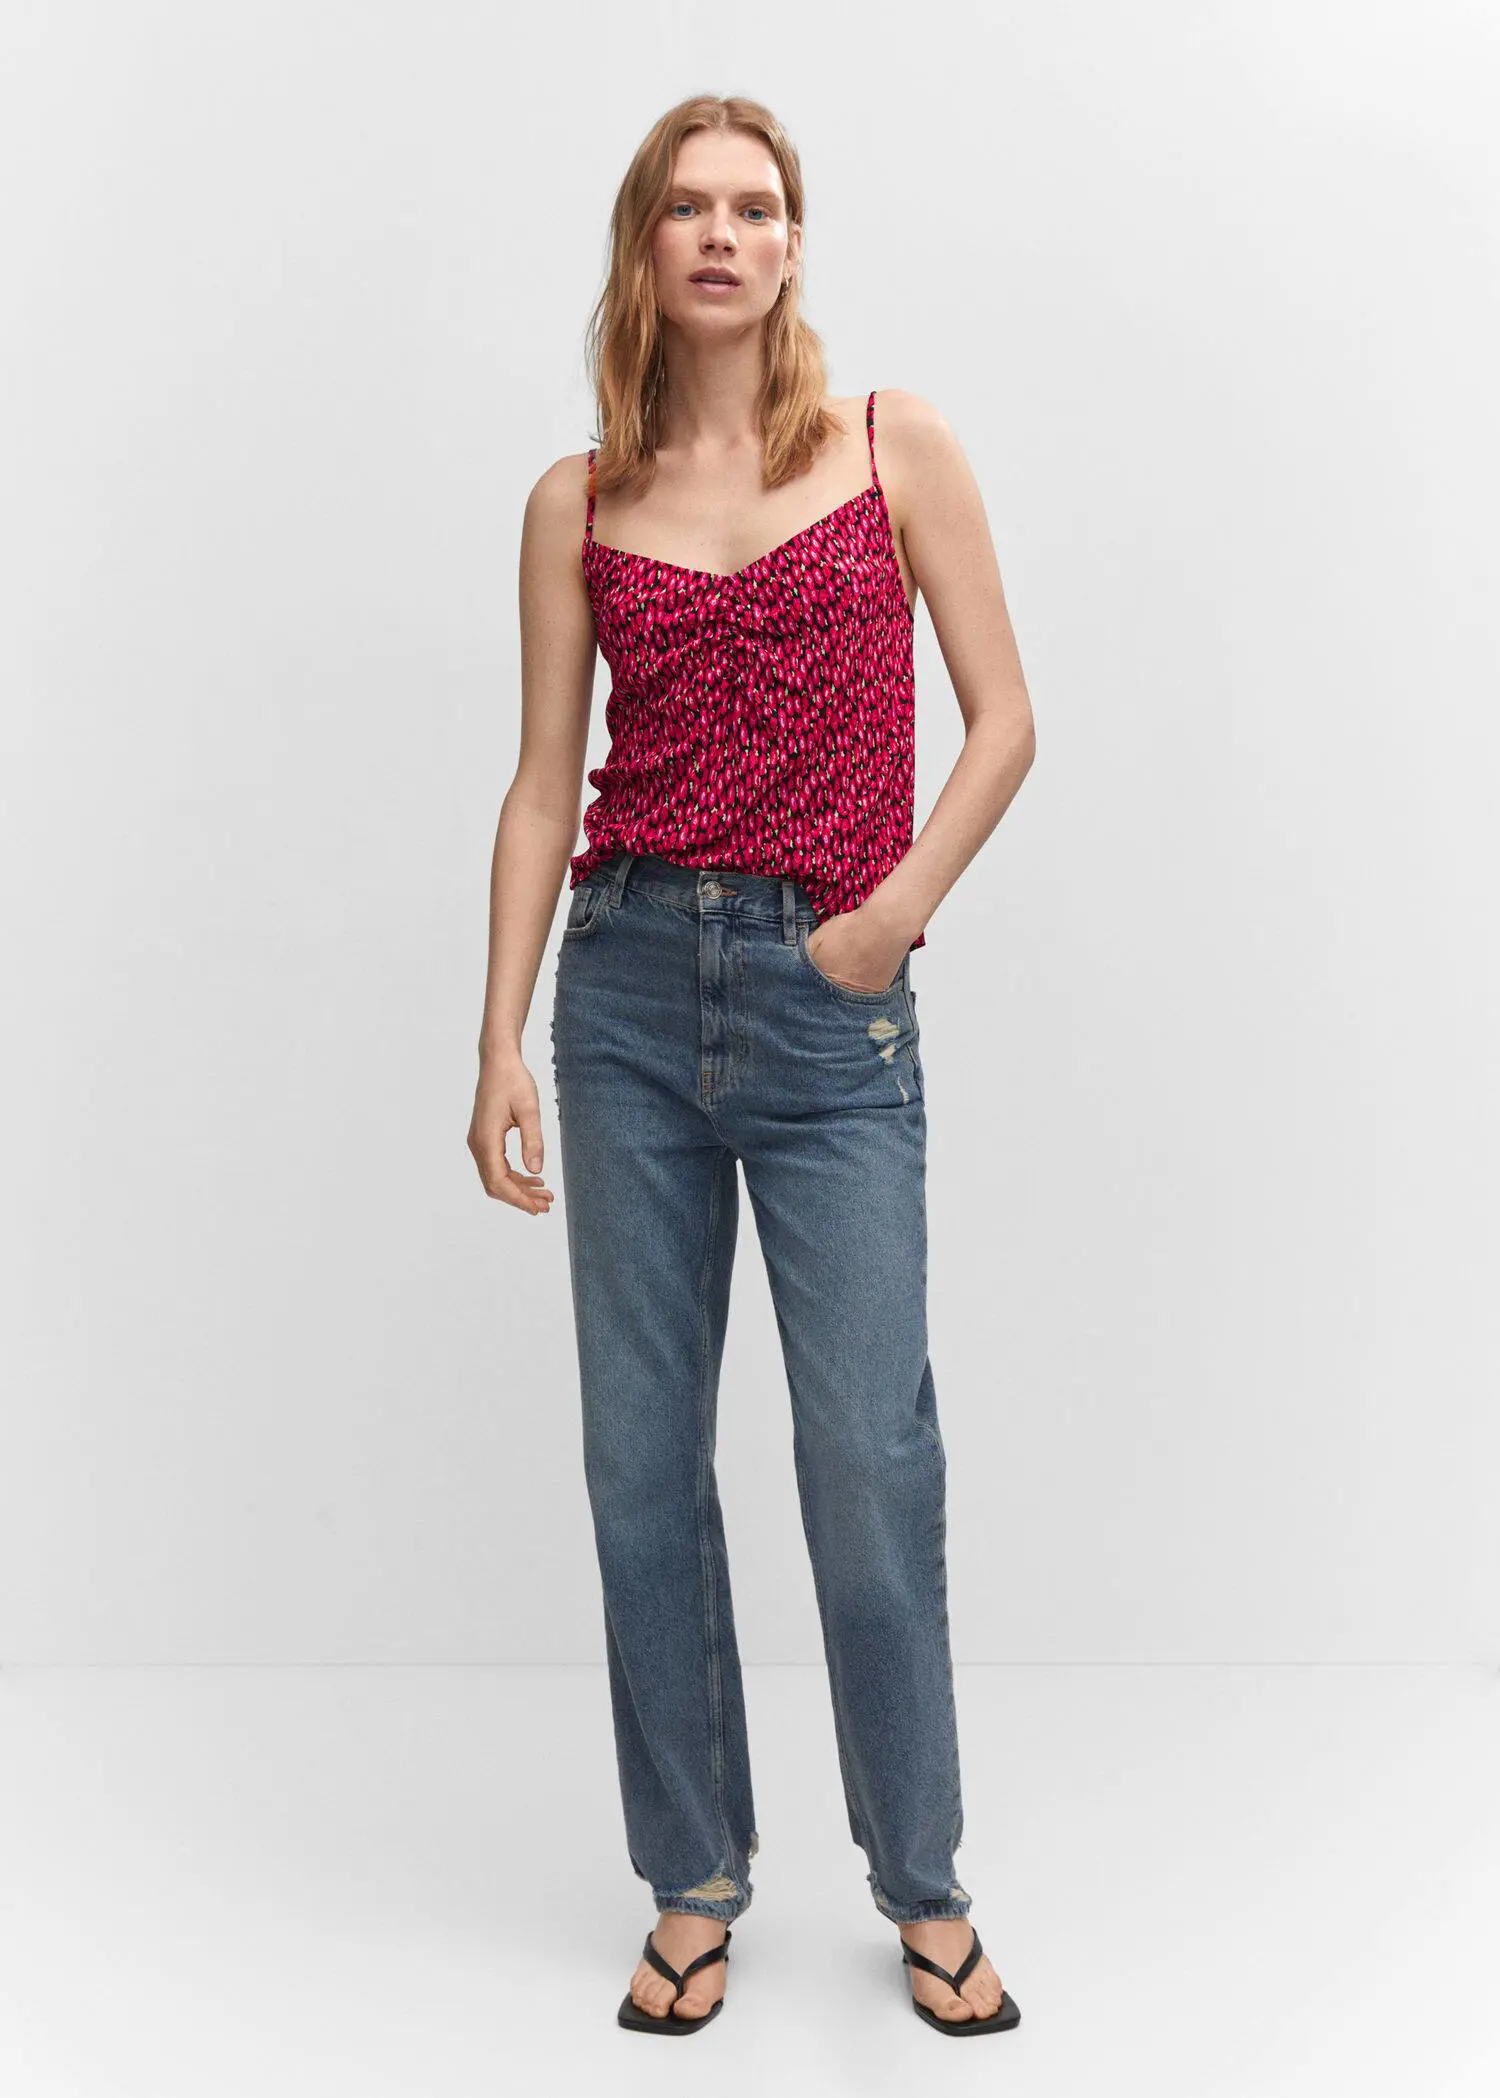 Mango Print ruched top. a woman in a red top and blue jeans. 